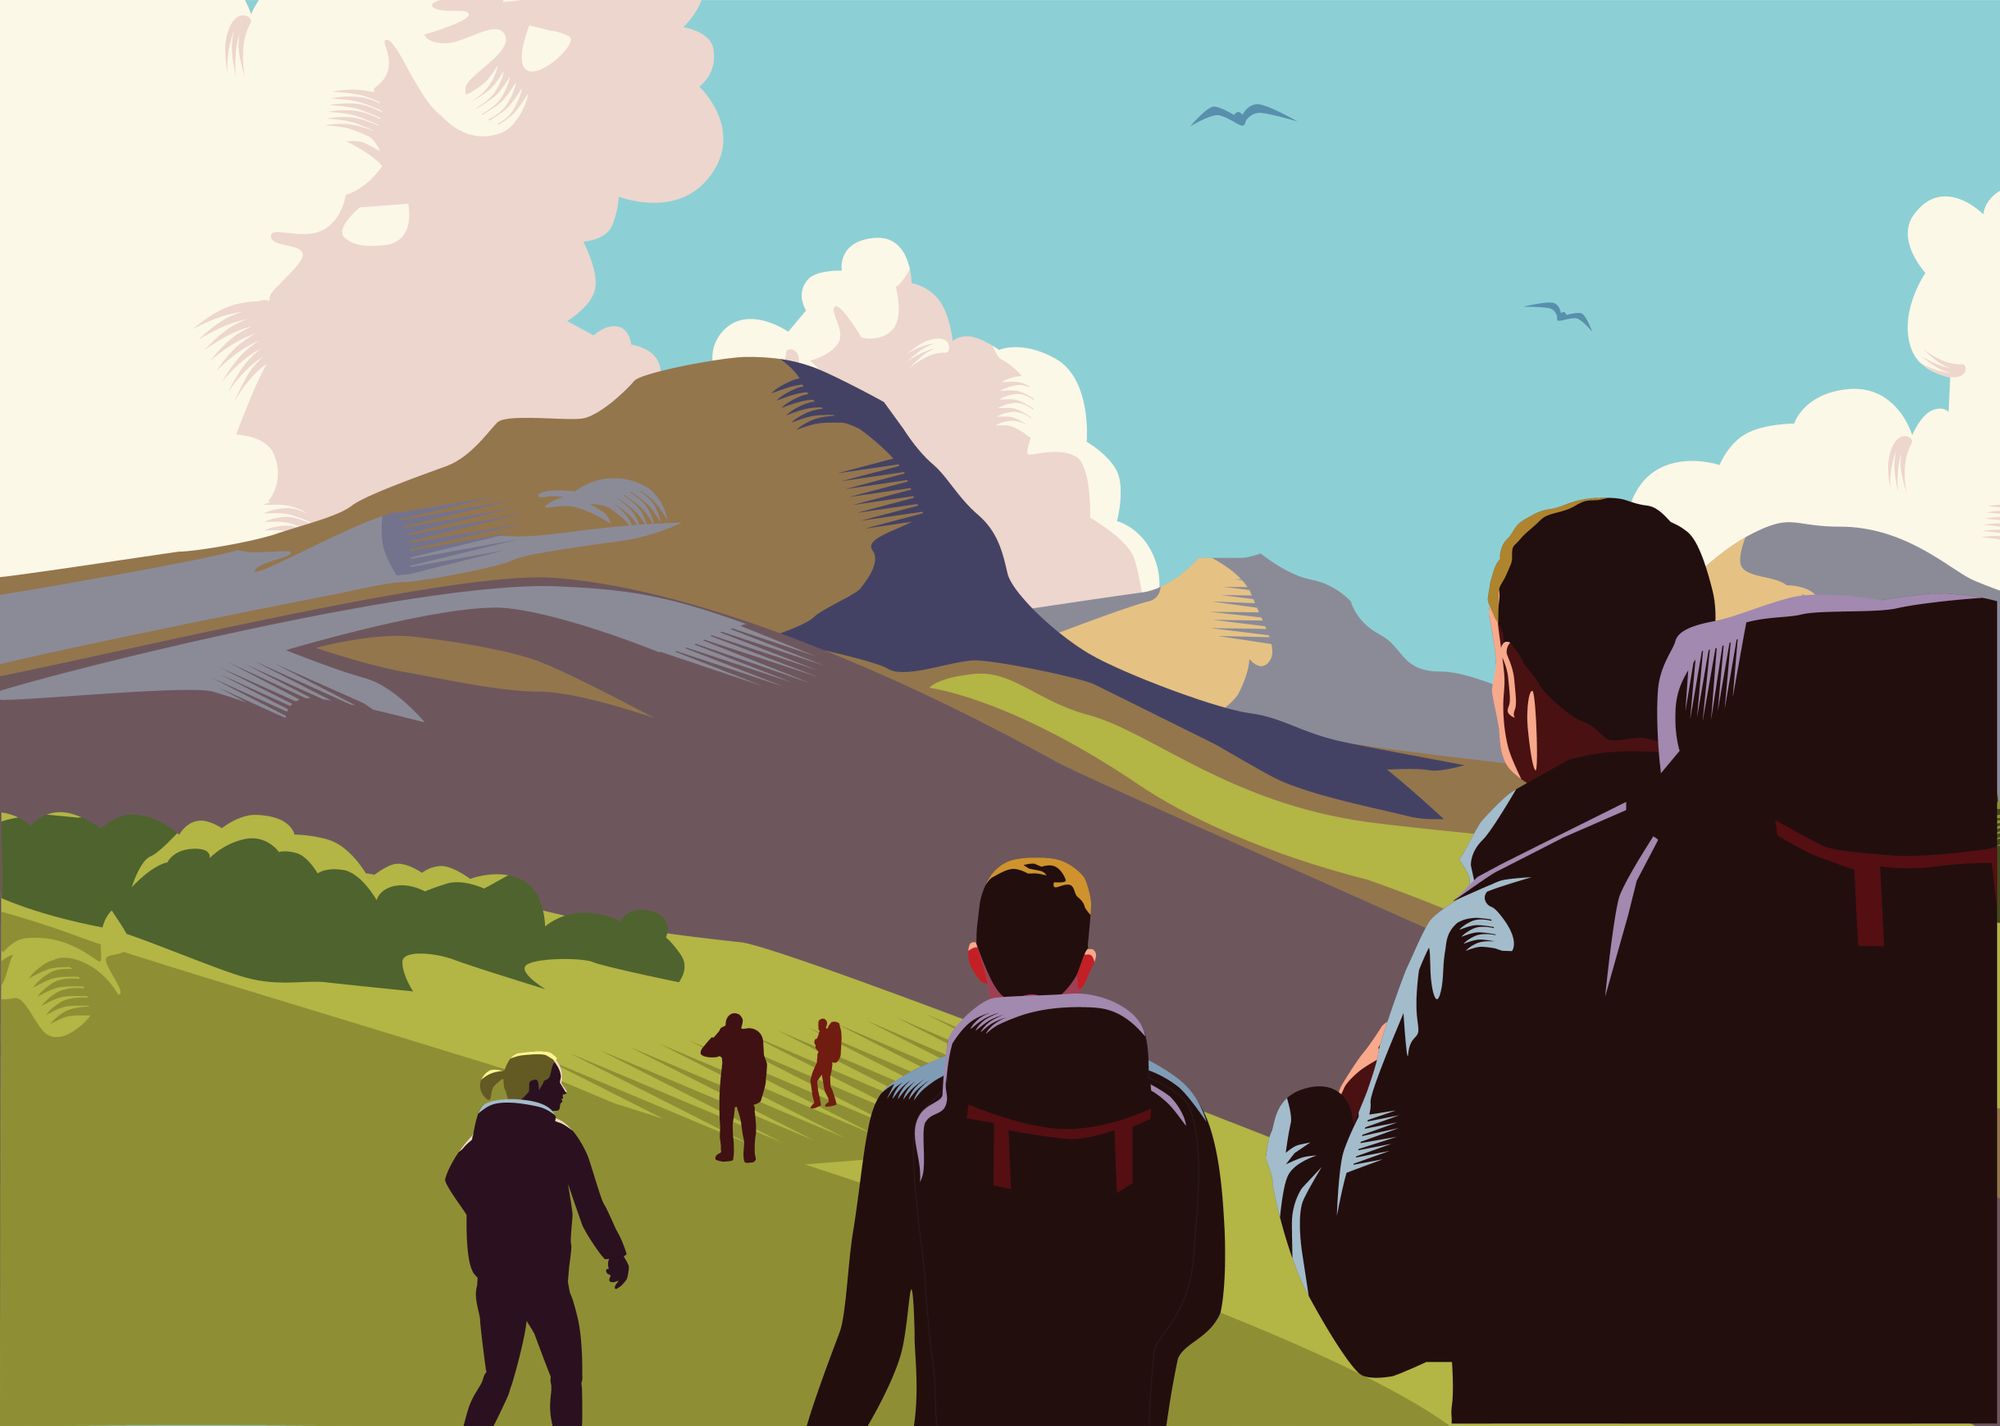 An illustration of a group of hikers ascending a mountain in the UK